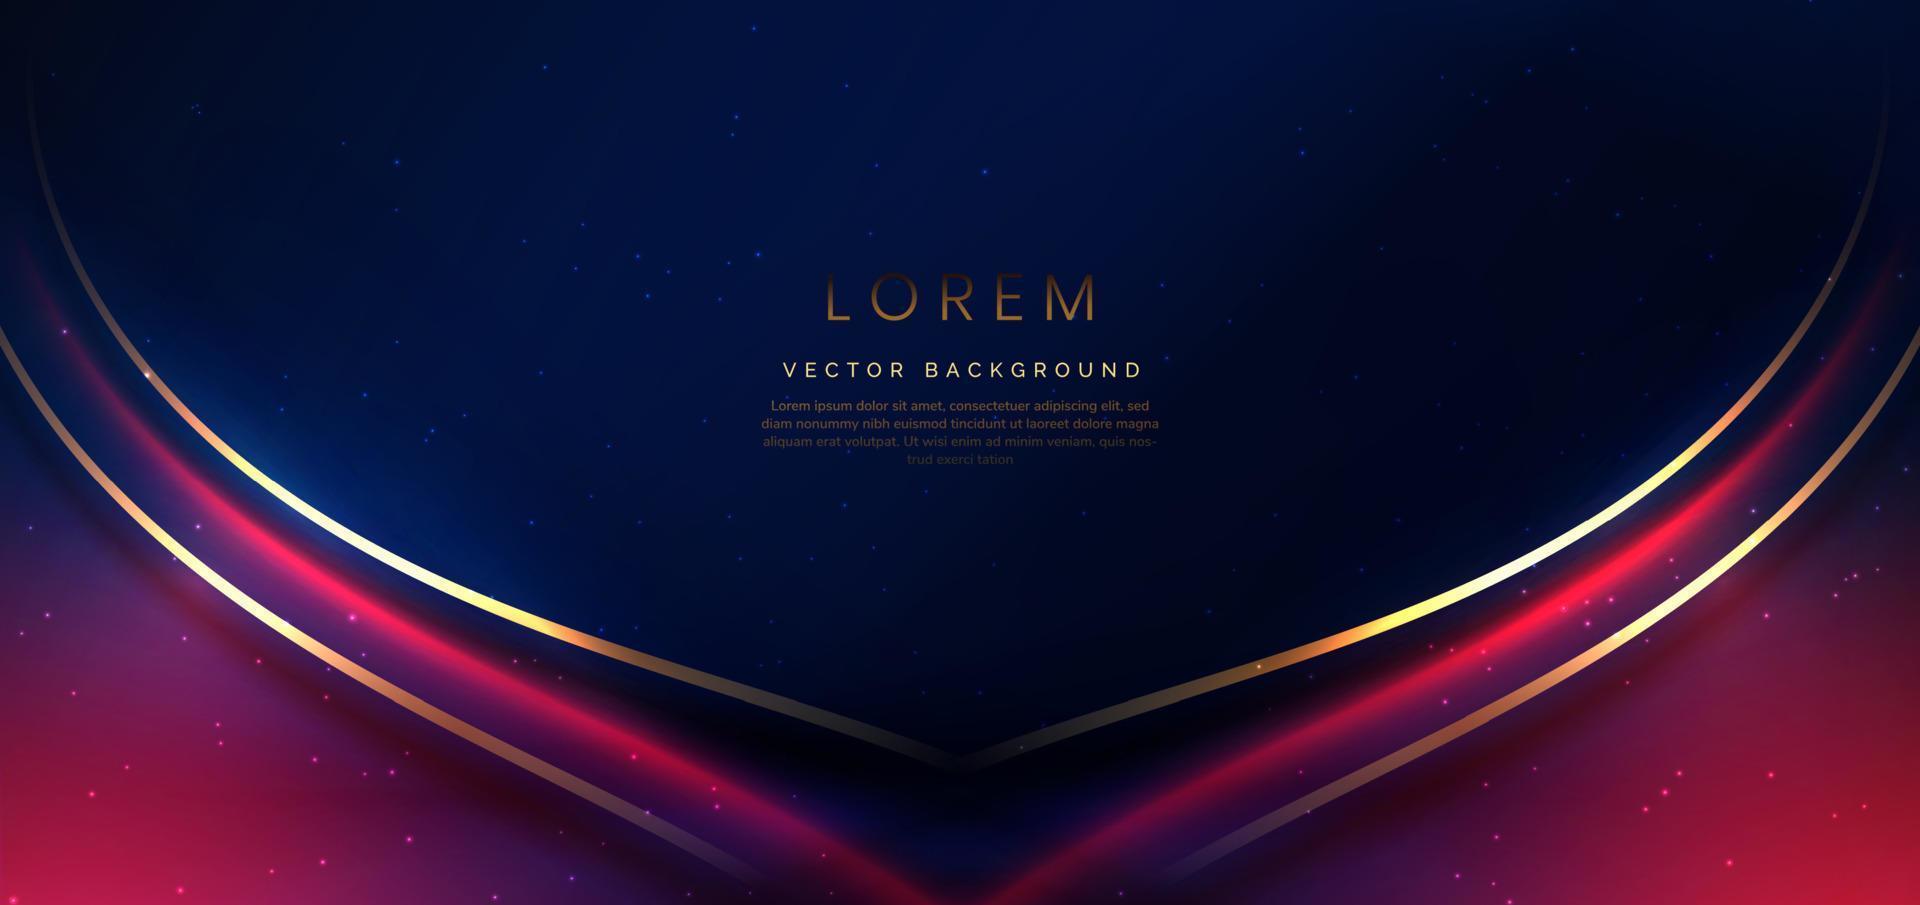 Luxury dark blue background with red and golden line curved and lighting effect sparkle. vector